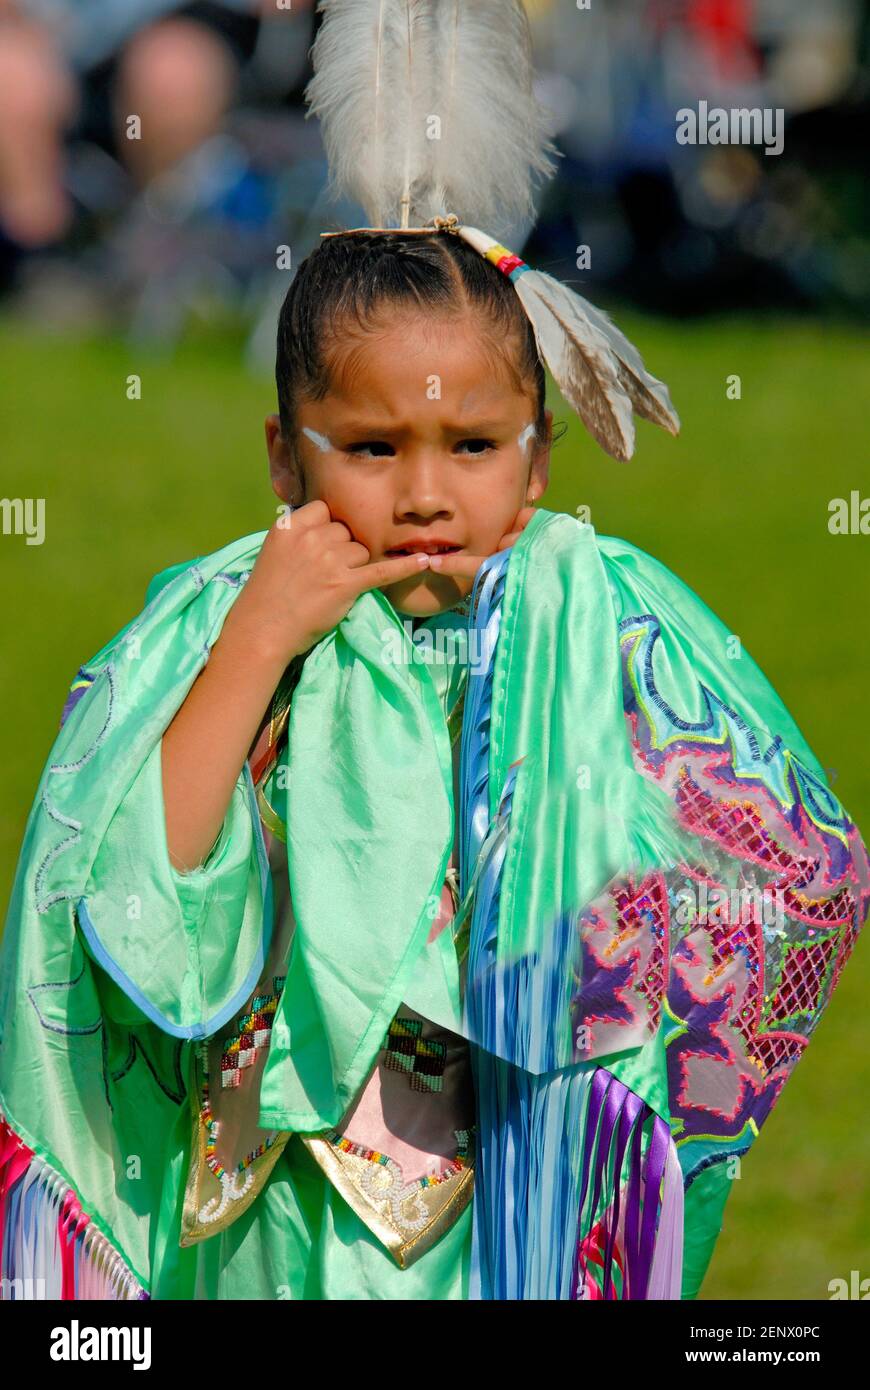 Children dance in a tribal powwow event in North America Stock Photo